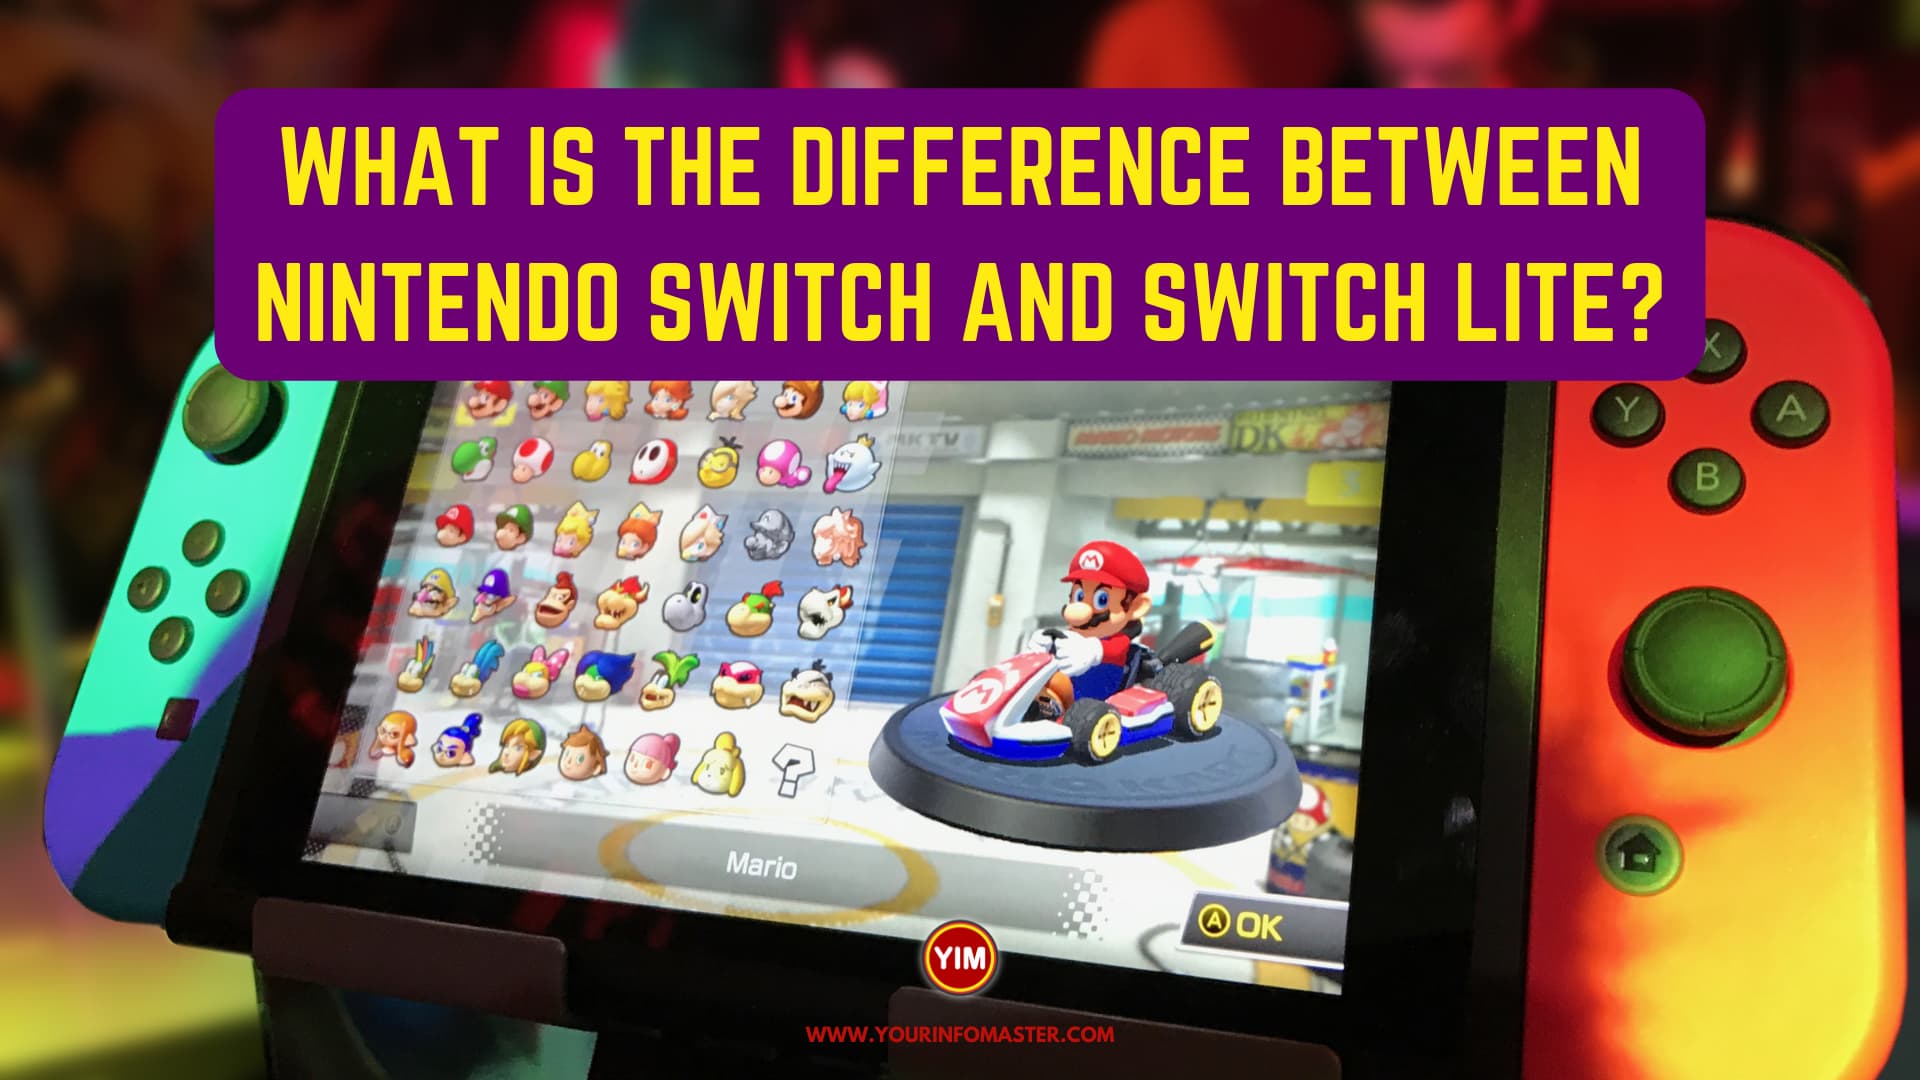 What is the difference between Nintendo Switch and Switch Lite